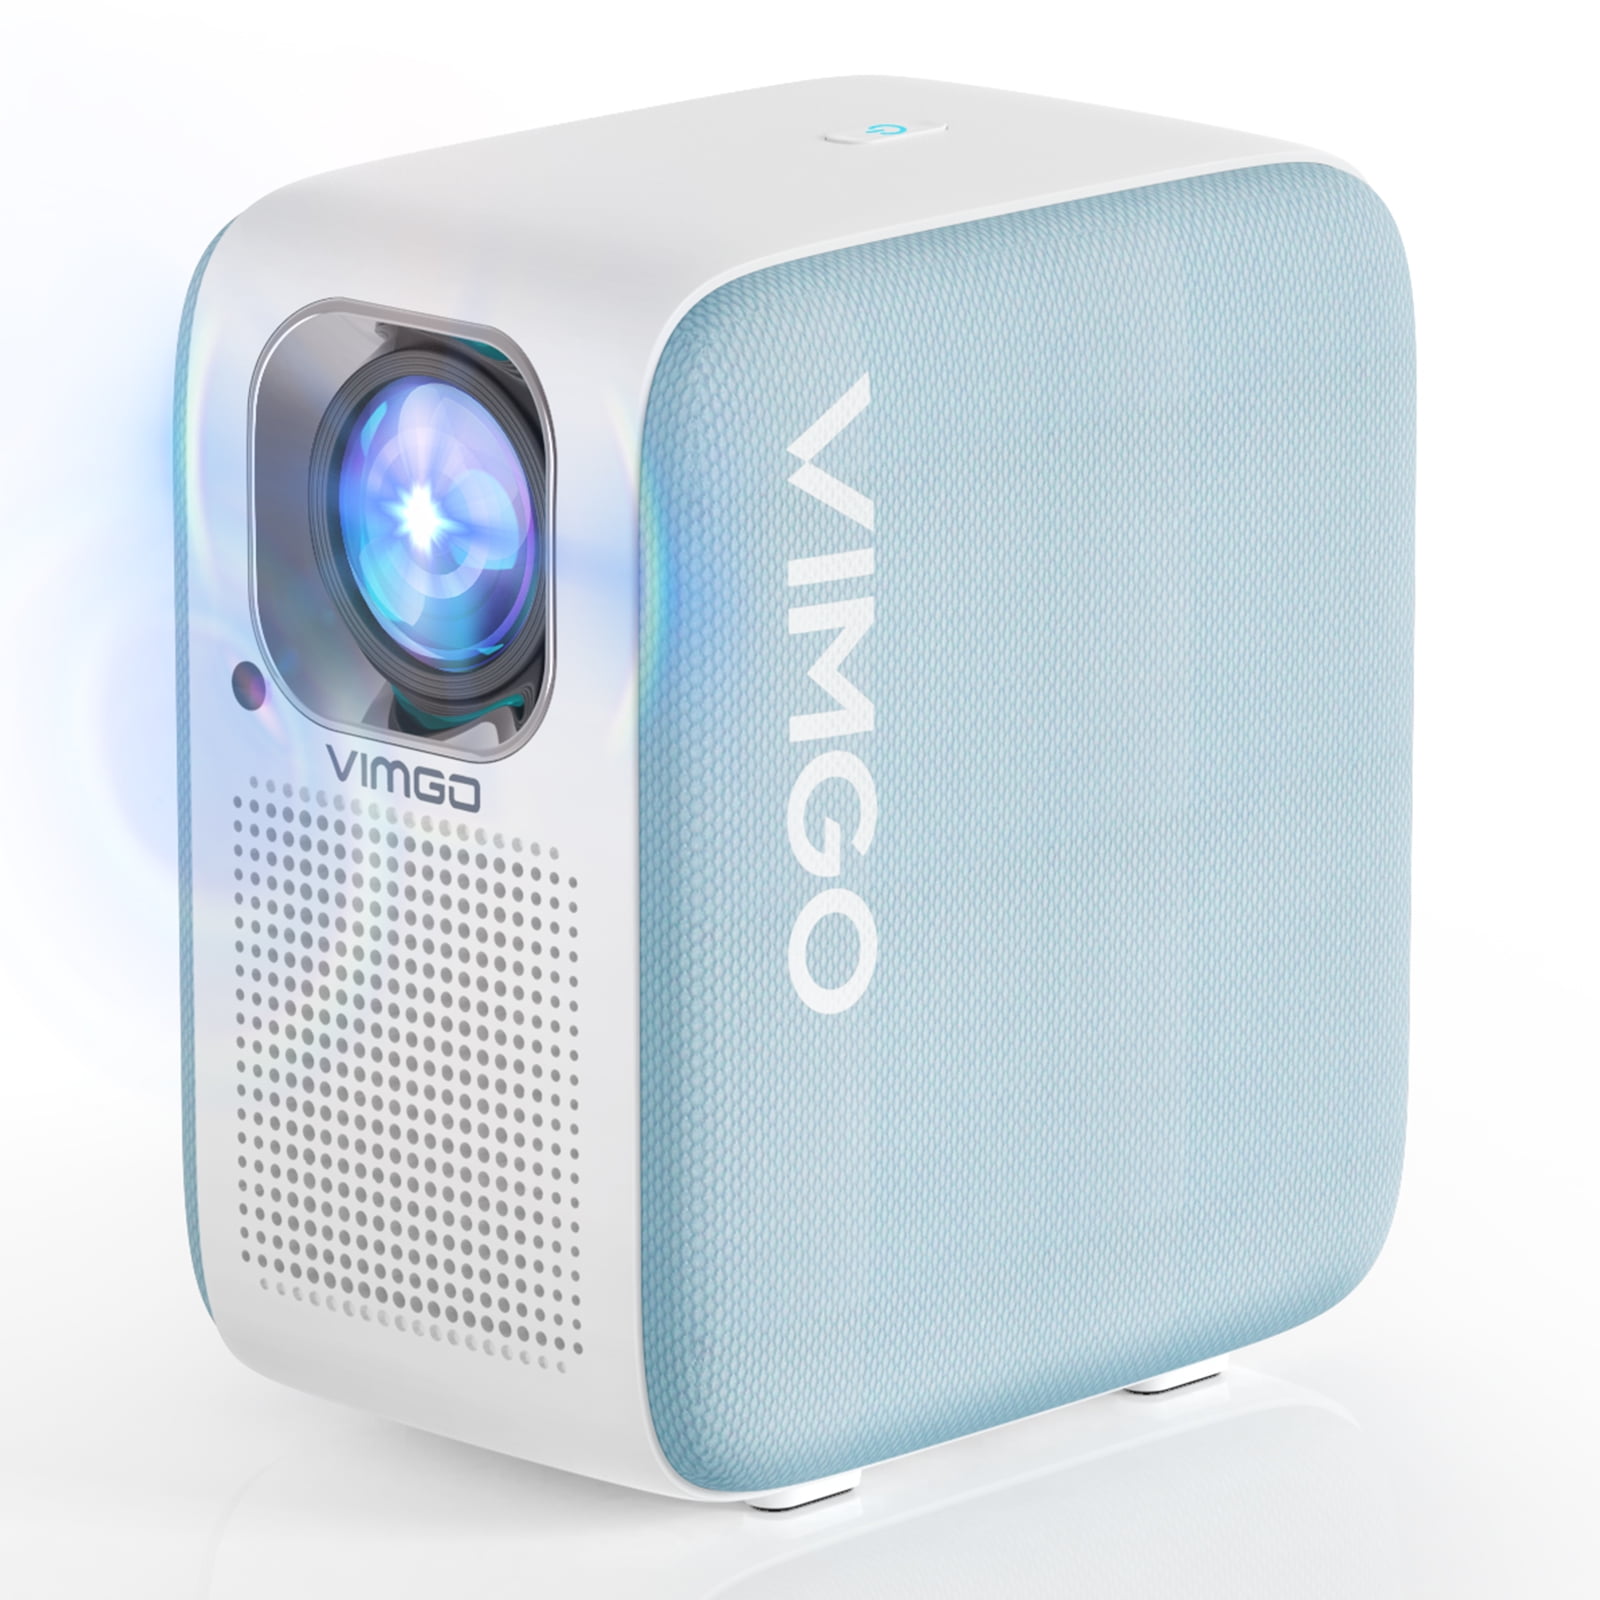 Vimgo Portable Mini Projector, LCD Native 1080P Video Projector with  Android OS, 300 Ansi